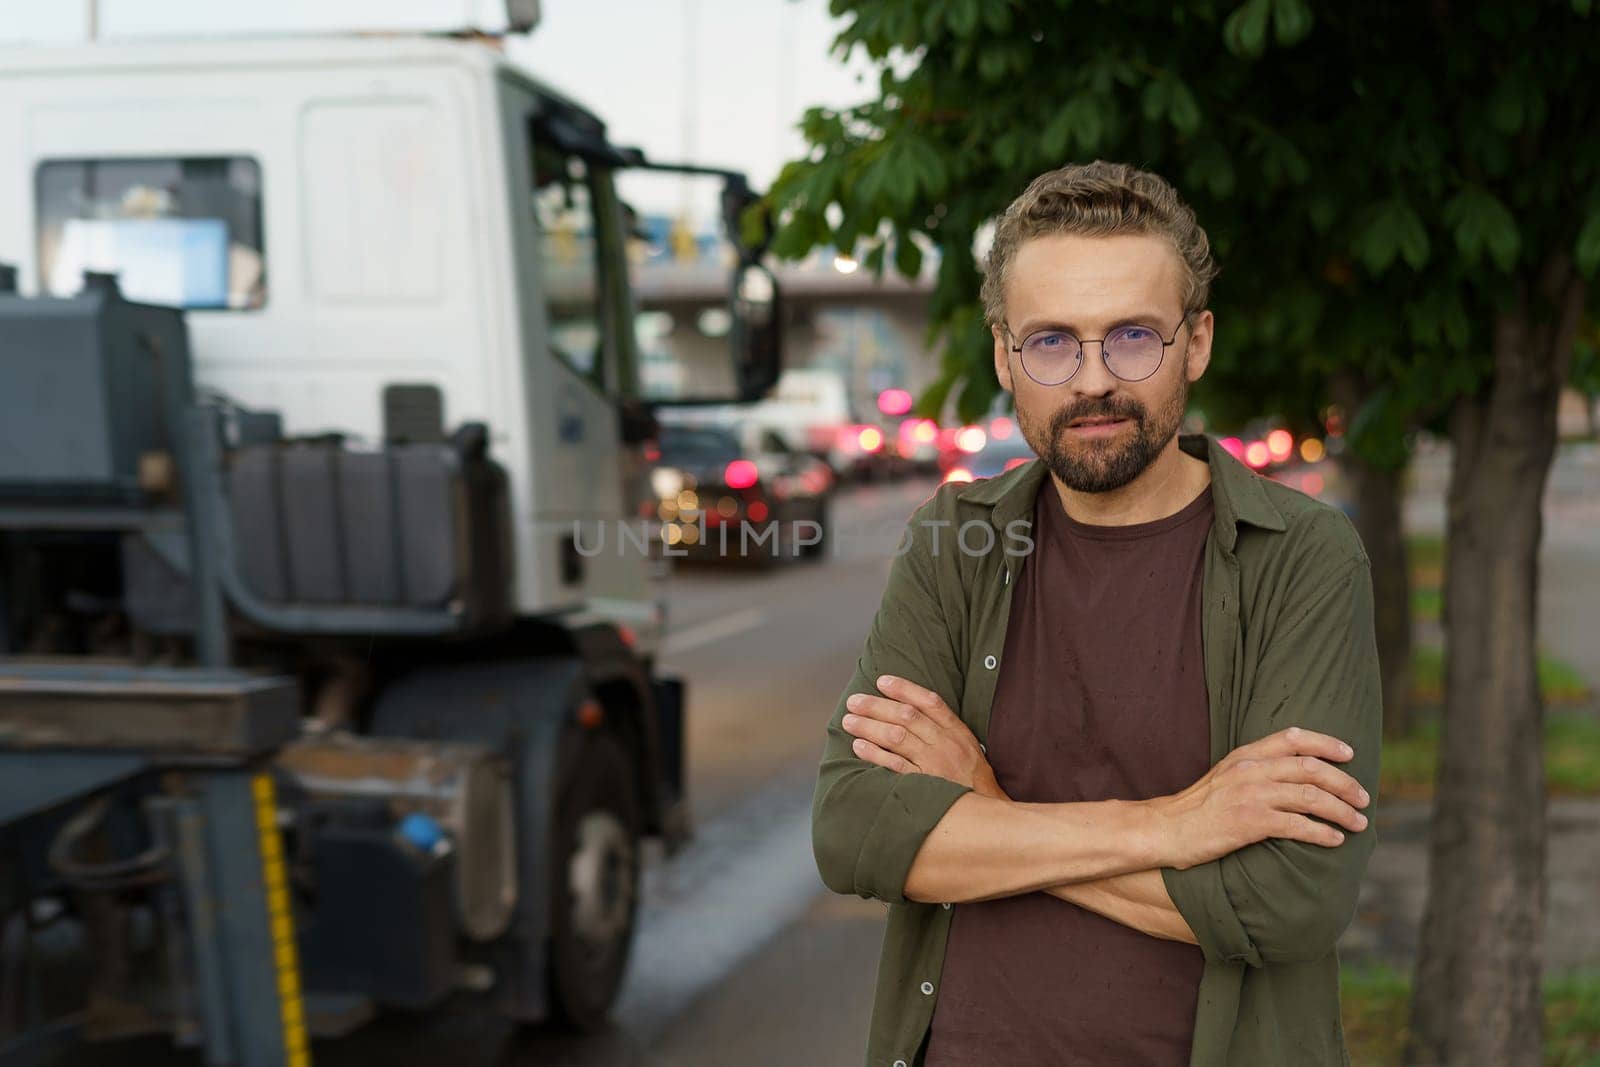 Depressed man with crossed hands against backdrop of truck, symbolizing concept of illegal parking. Truck background represents consequences and potential enforcement of parking violations. by LipikStockMedia